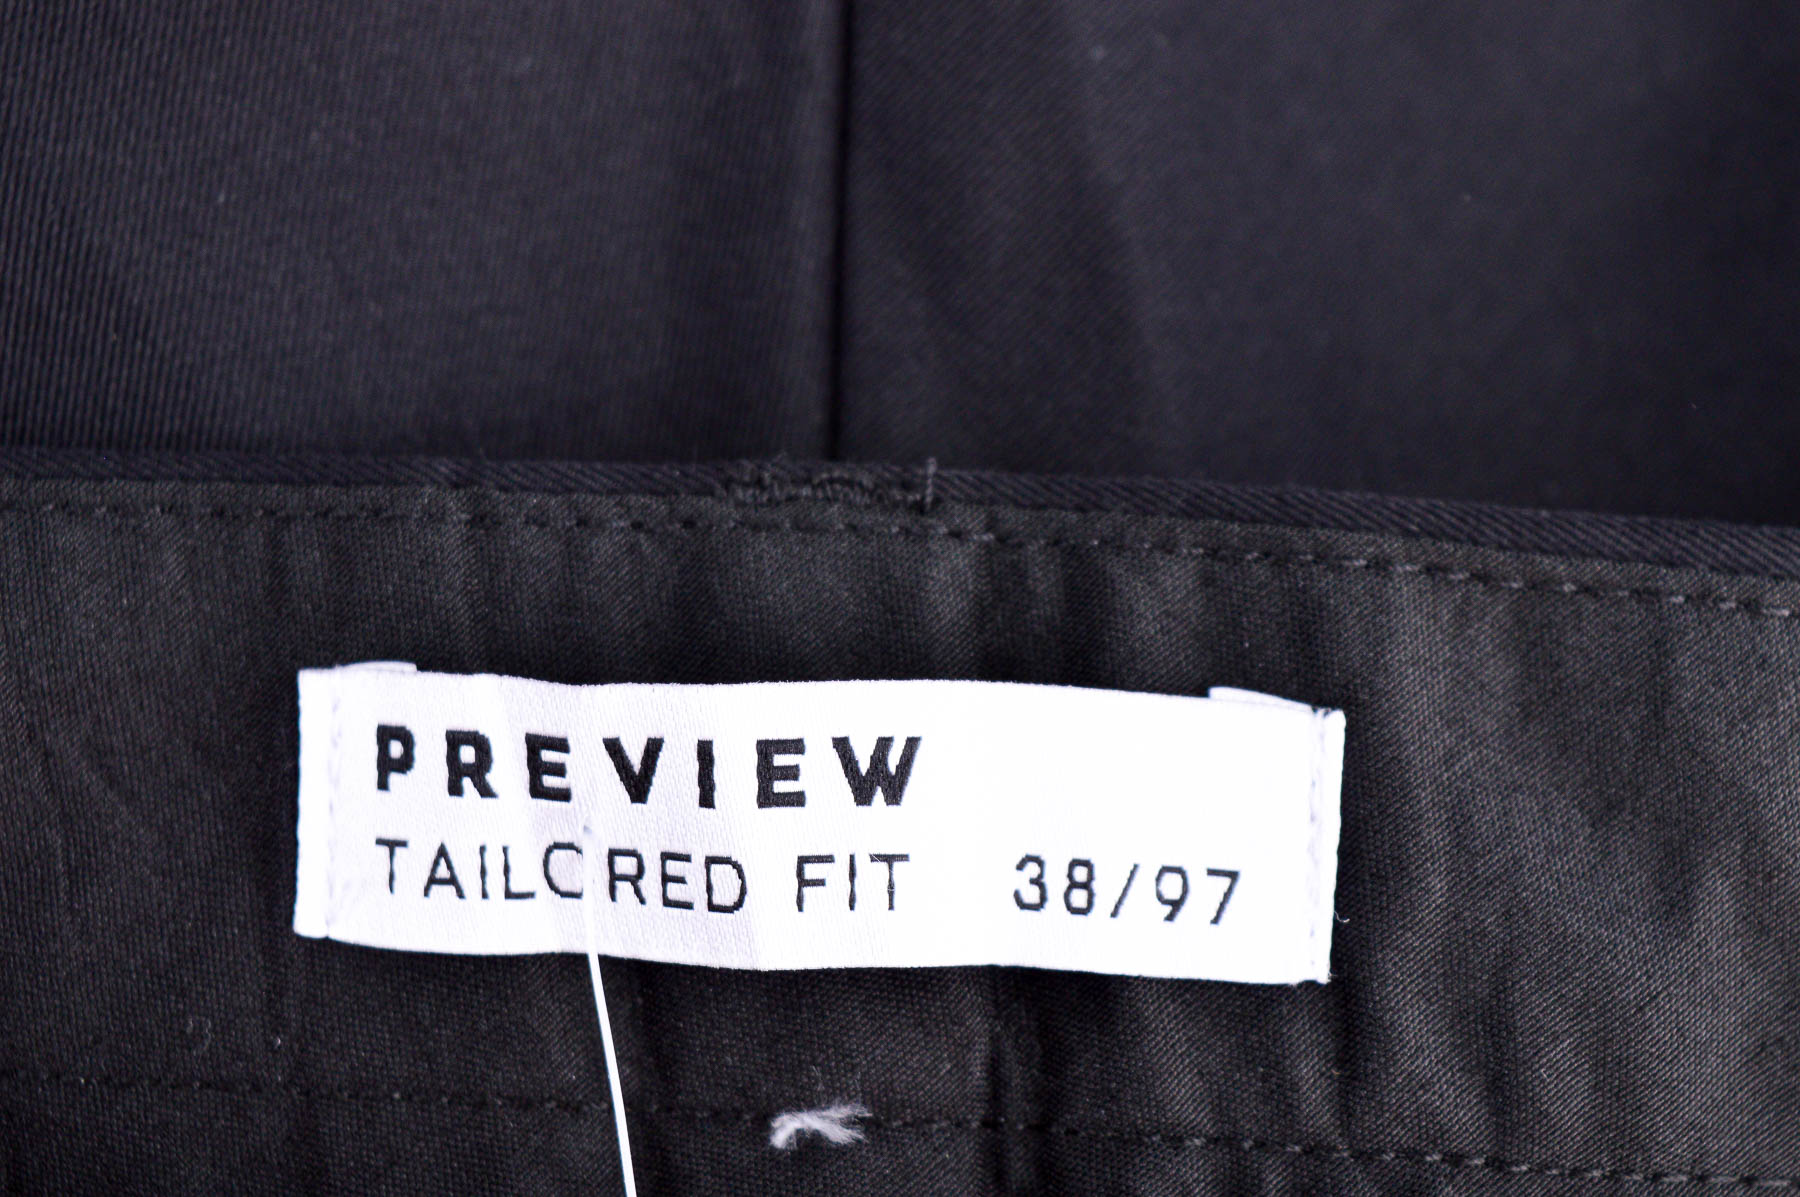 Men's trousers - PREVIEW - 2